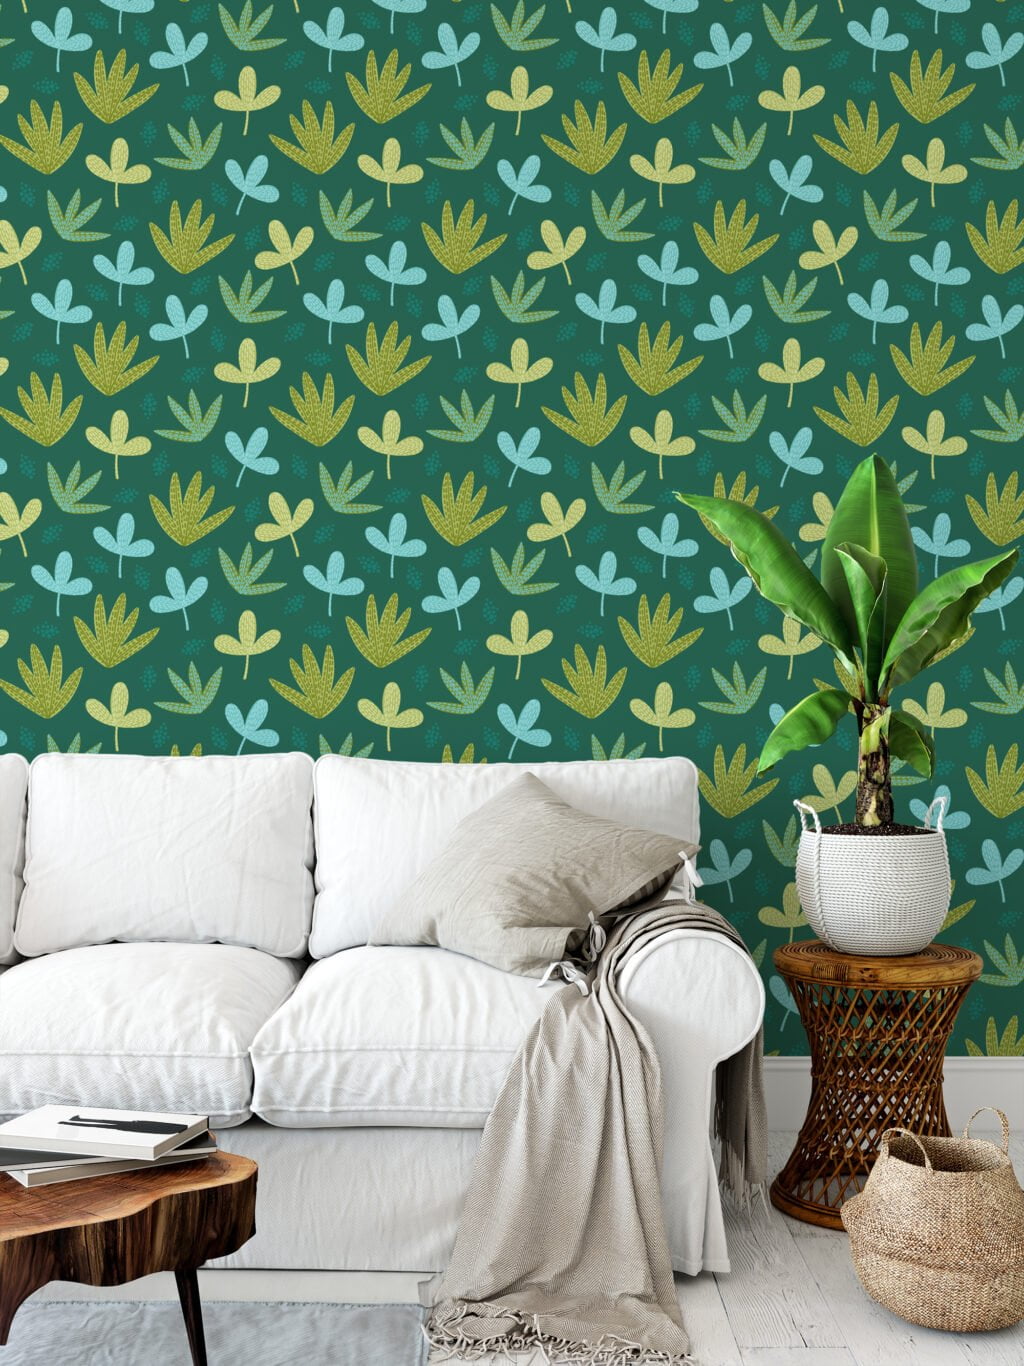 Abstract Green Leaves Shapes Illustration Wallpaper, Enchanting Leaf Pattern Peel & Stick Wall Mural